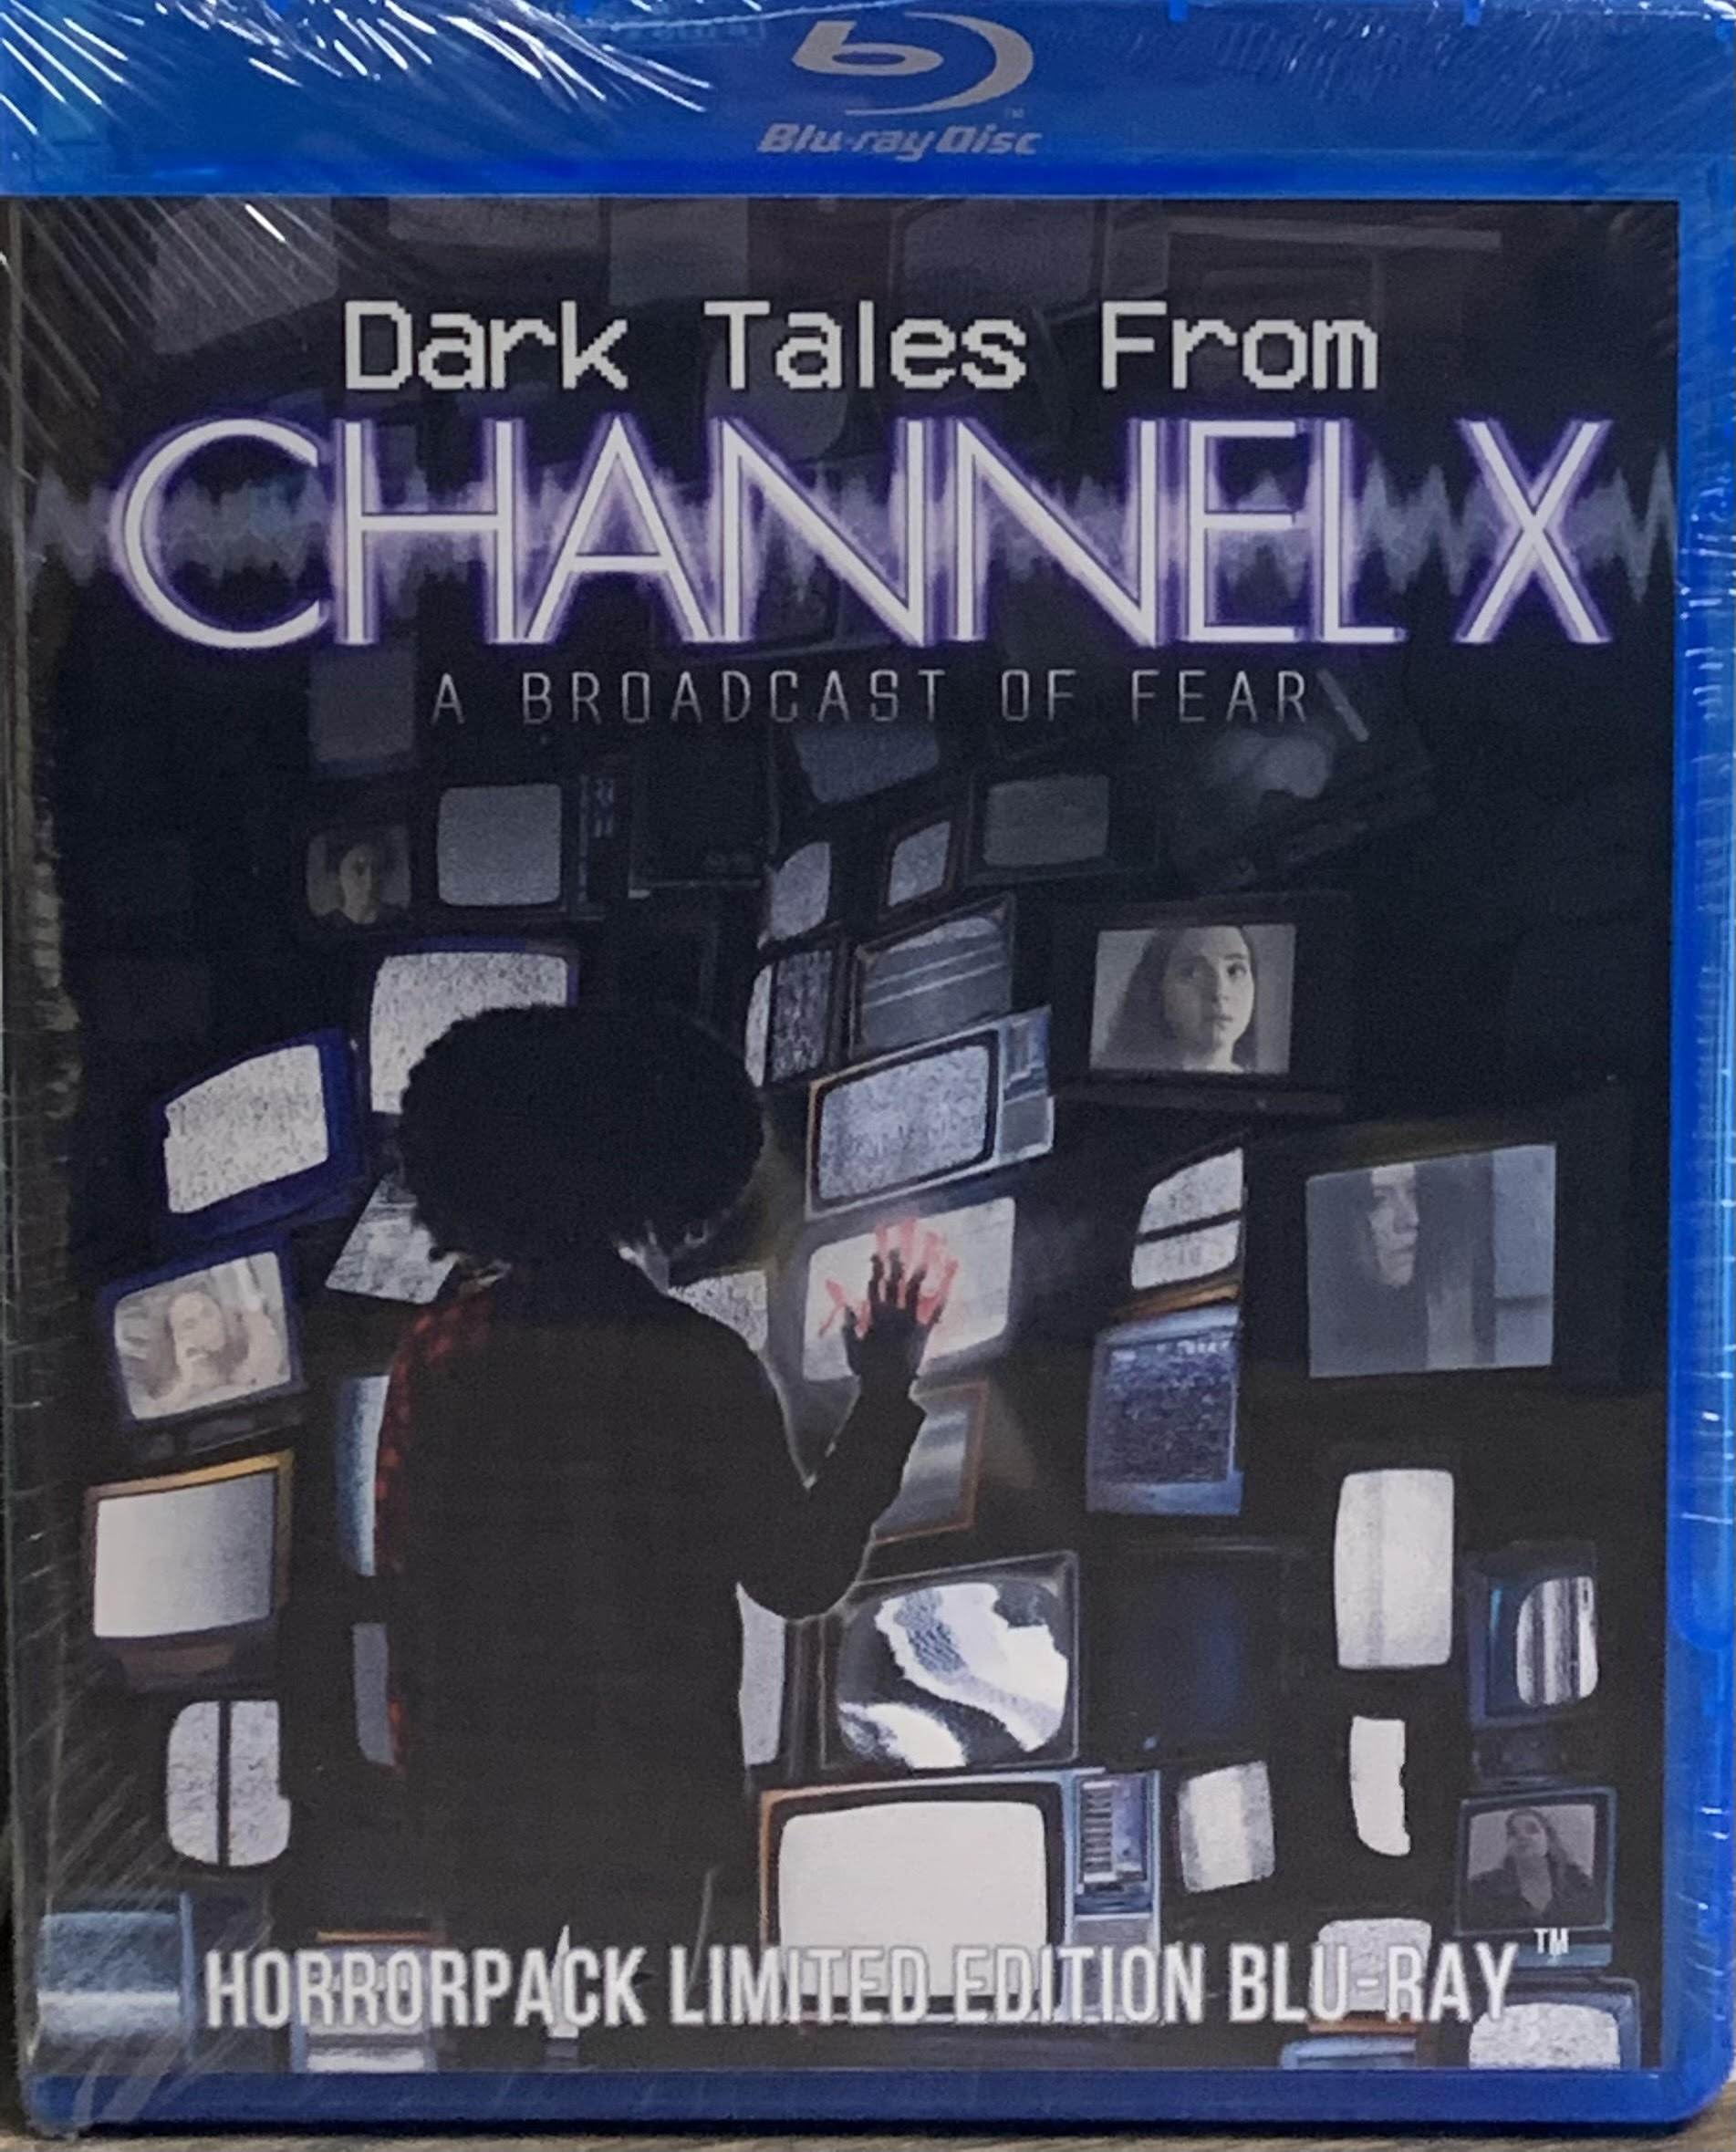 Dark Tales from Channel X - HorrorPack Limited Edition Blu-ray #73